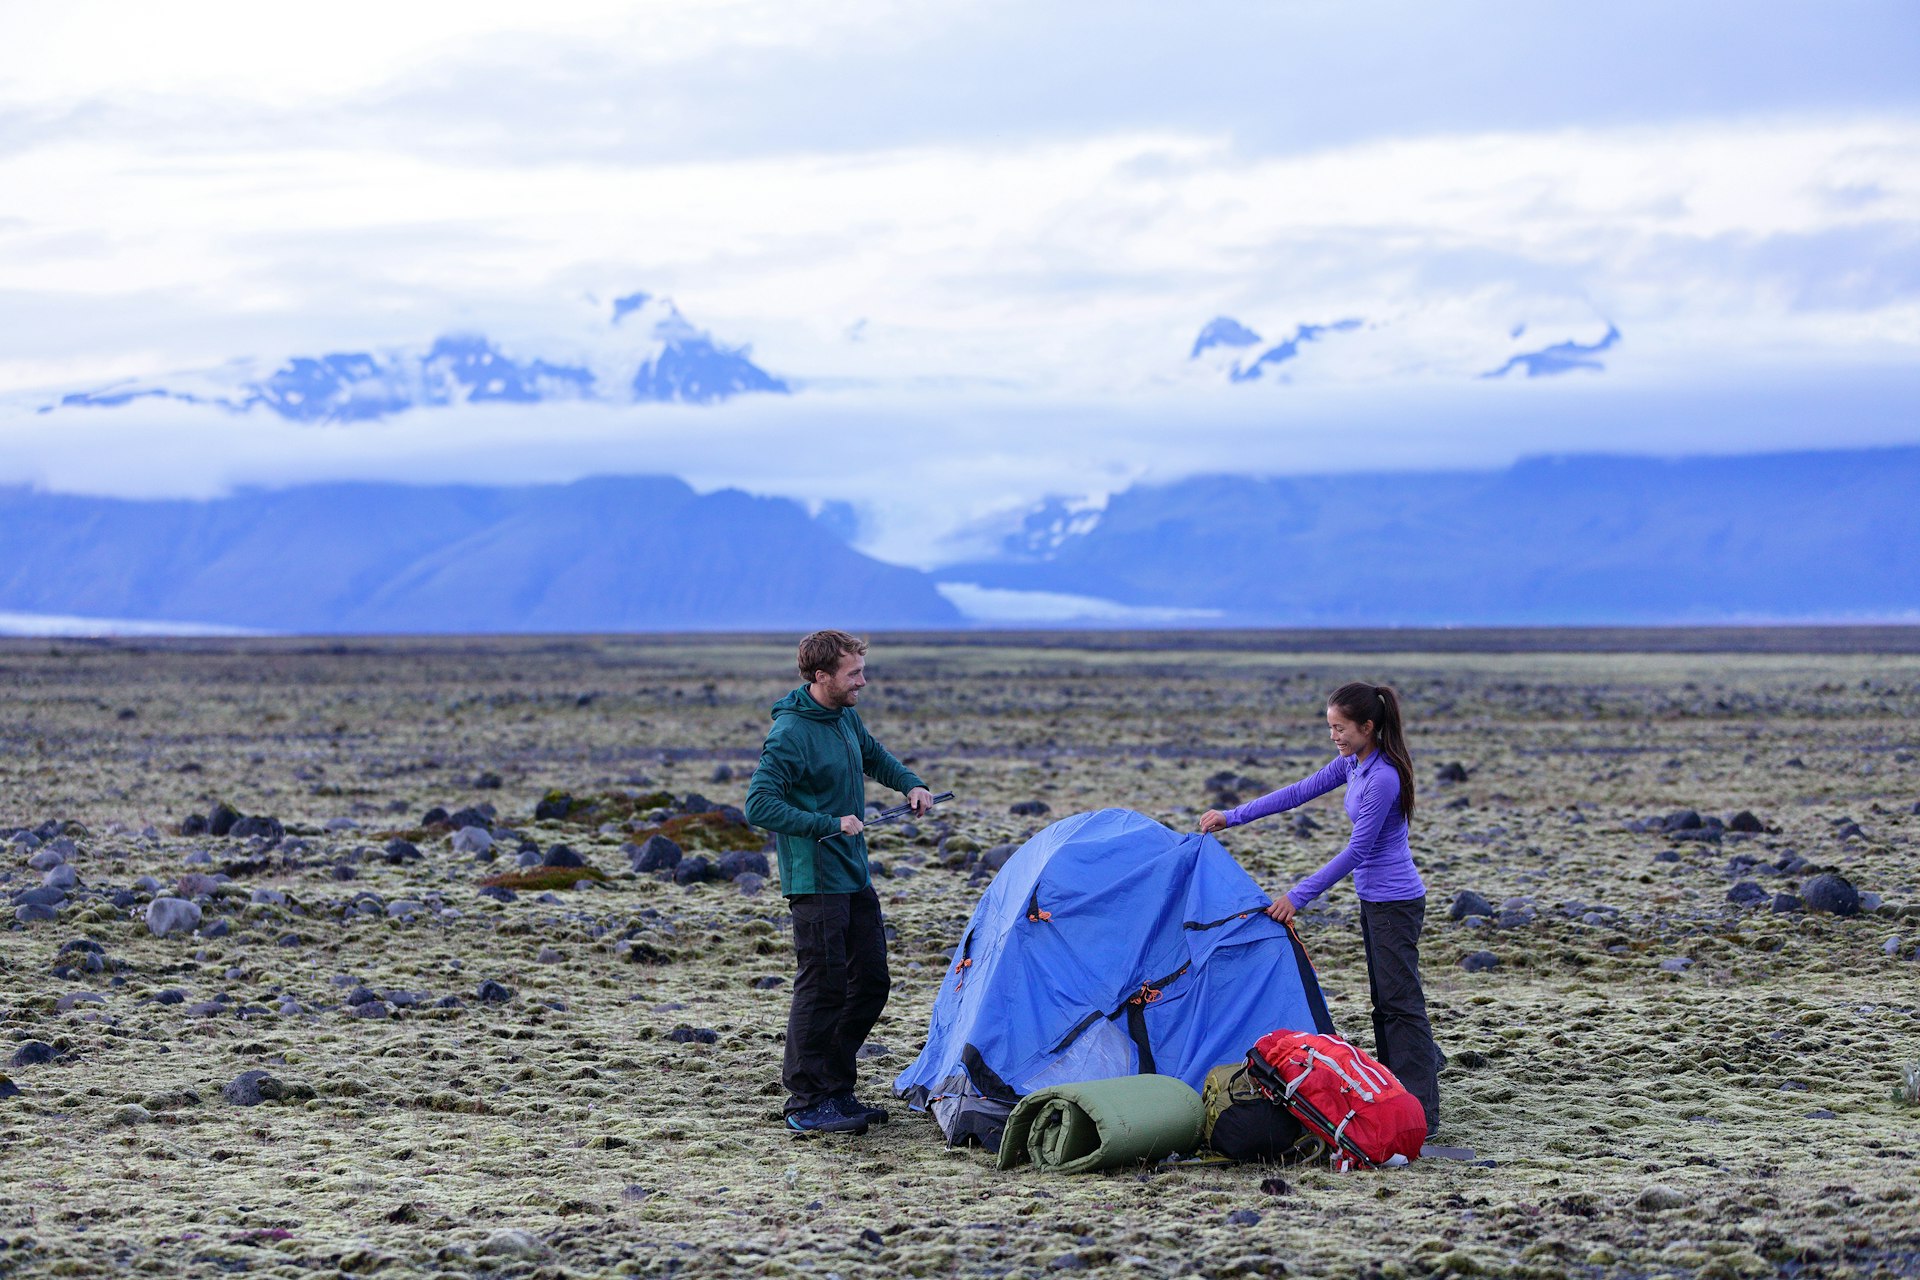 Camping couple pitching tent after hiking in Iceland backcountry